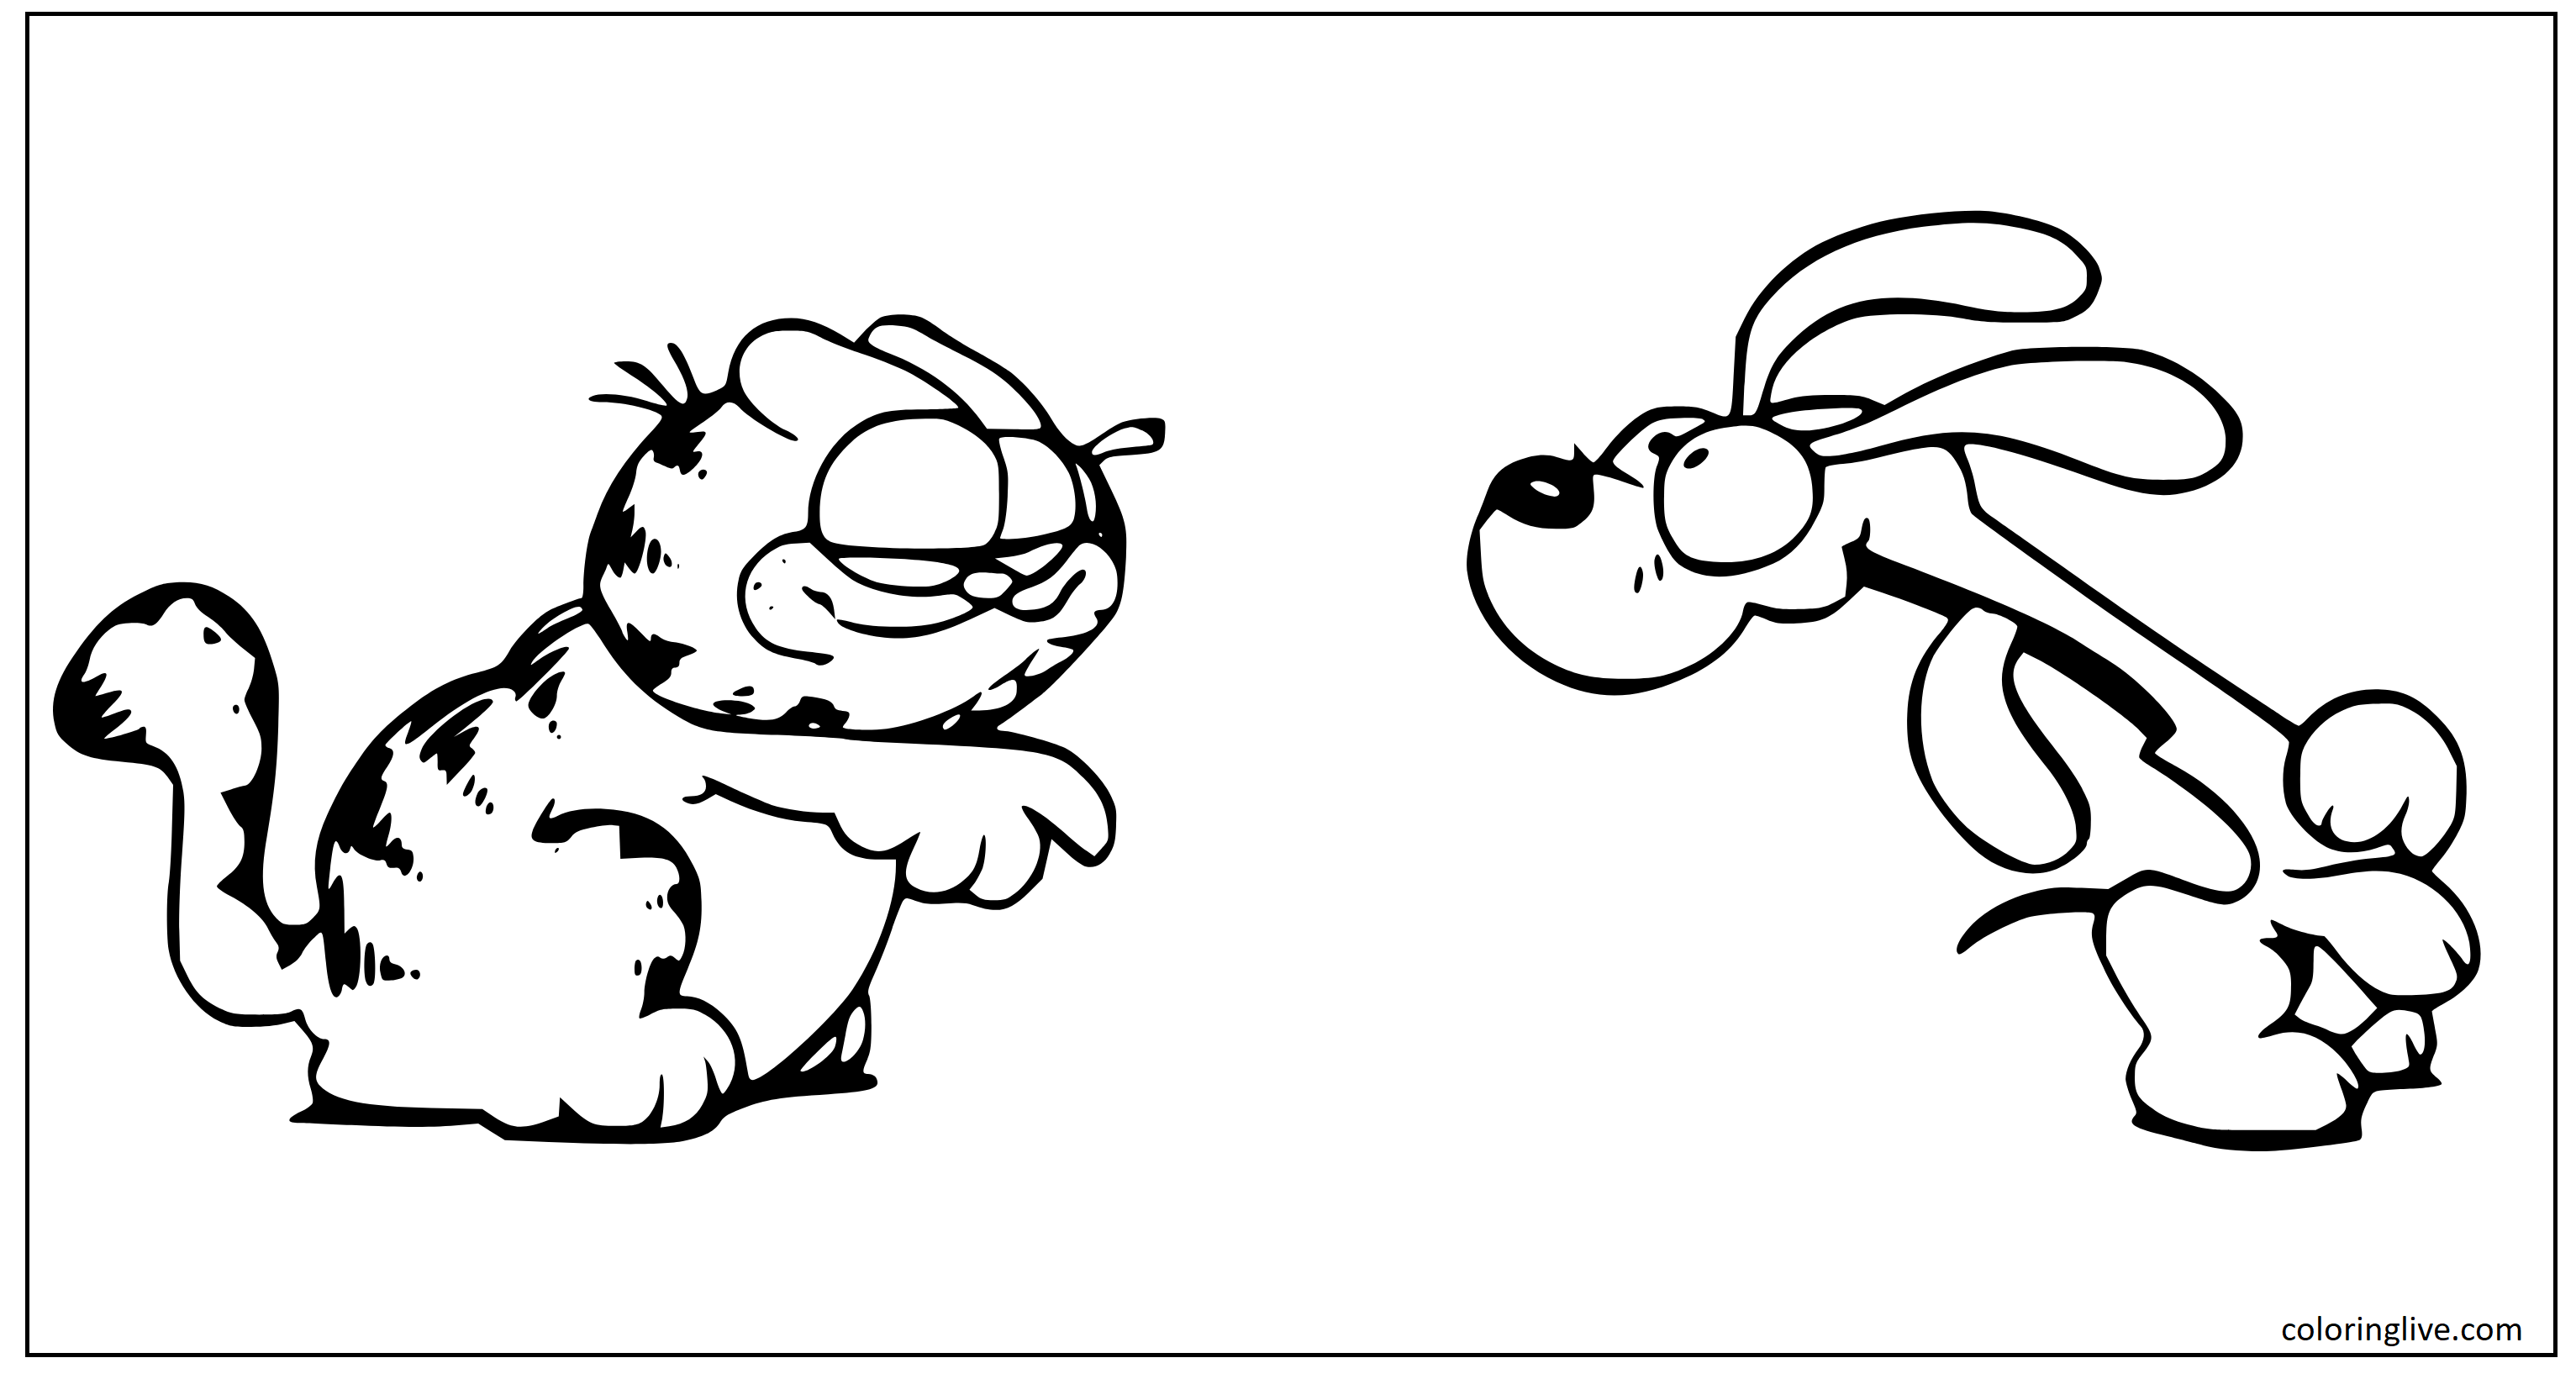 Printable Garfield and Odie looking at each other Coloring Page for kids.